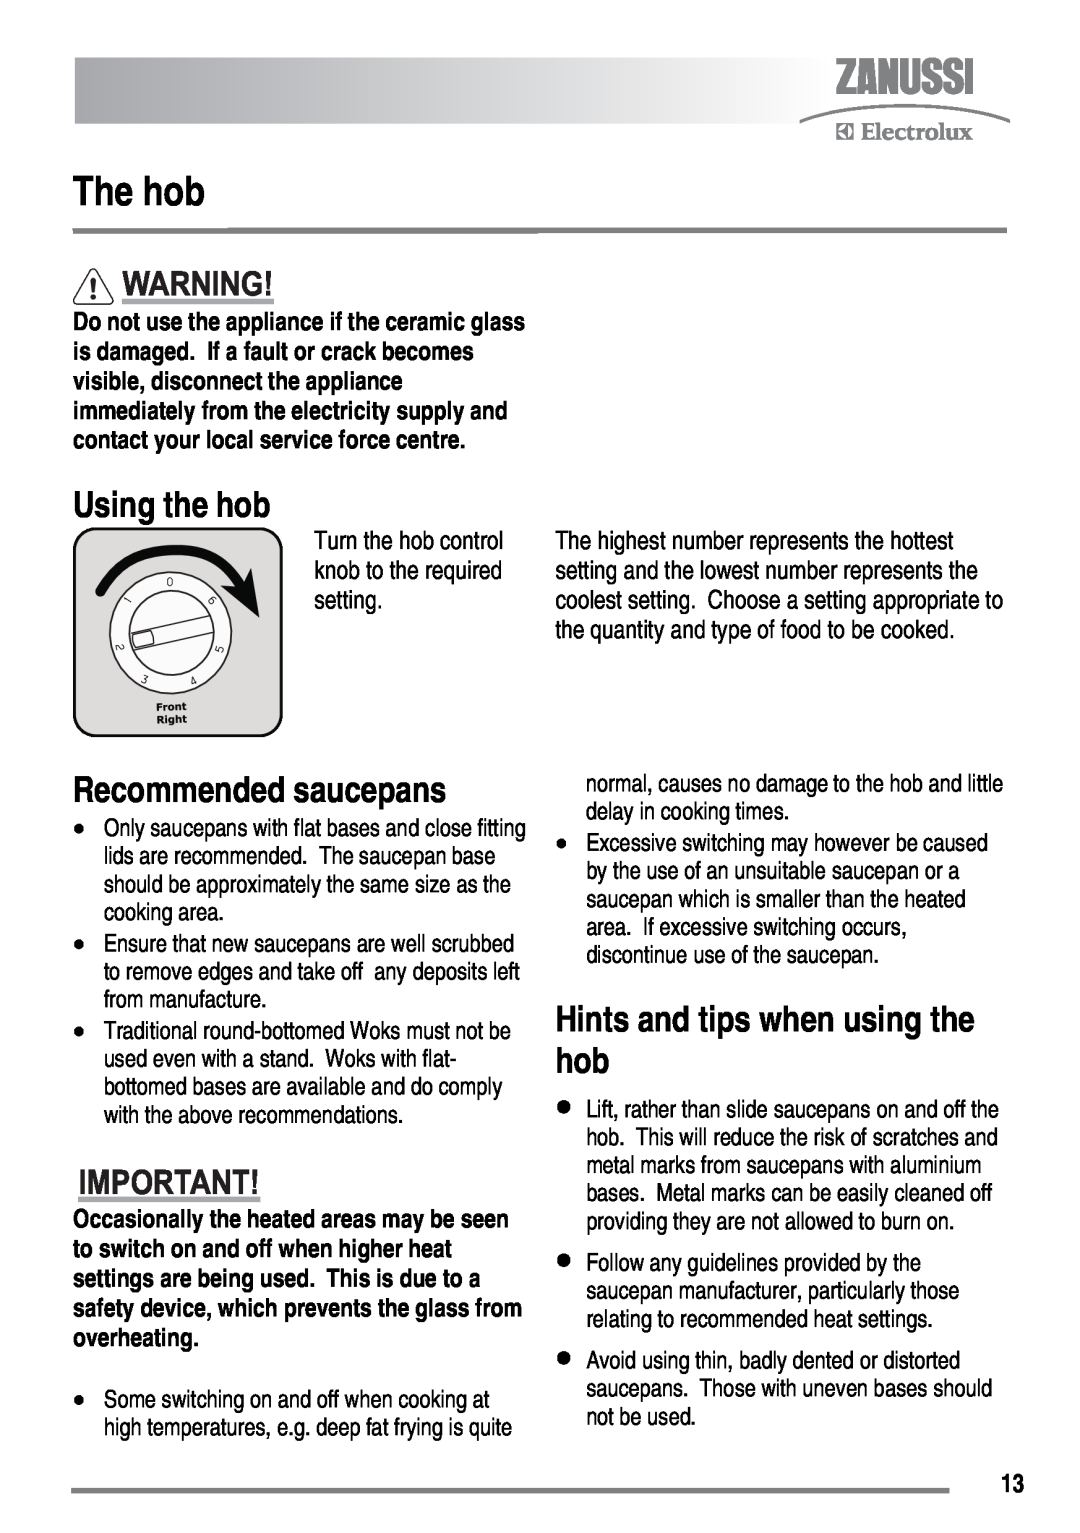 Zanussi ZKC6020 user manual The hob, Using the hob, Recommended saucepans, Hints and tips when using the hob 